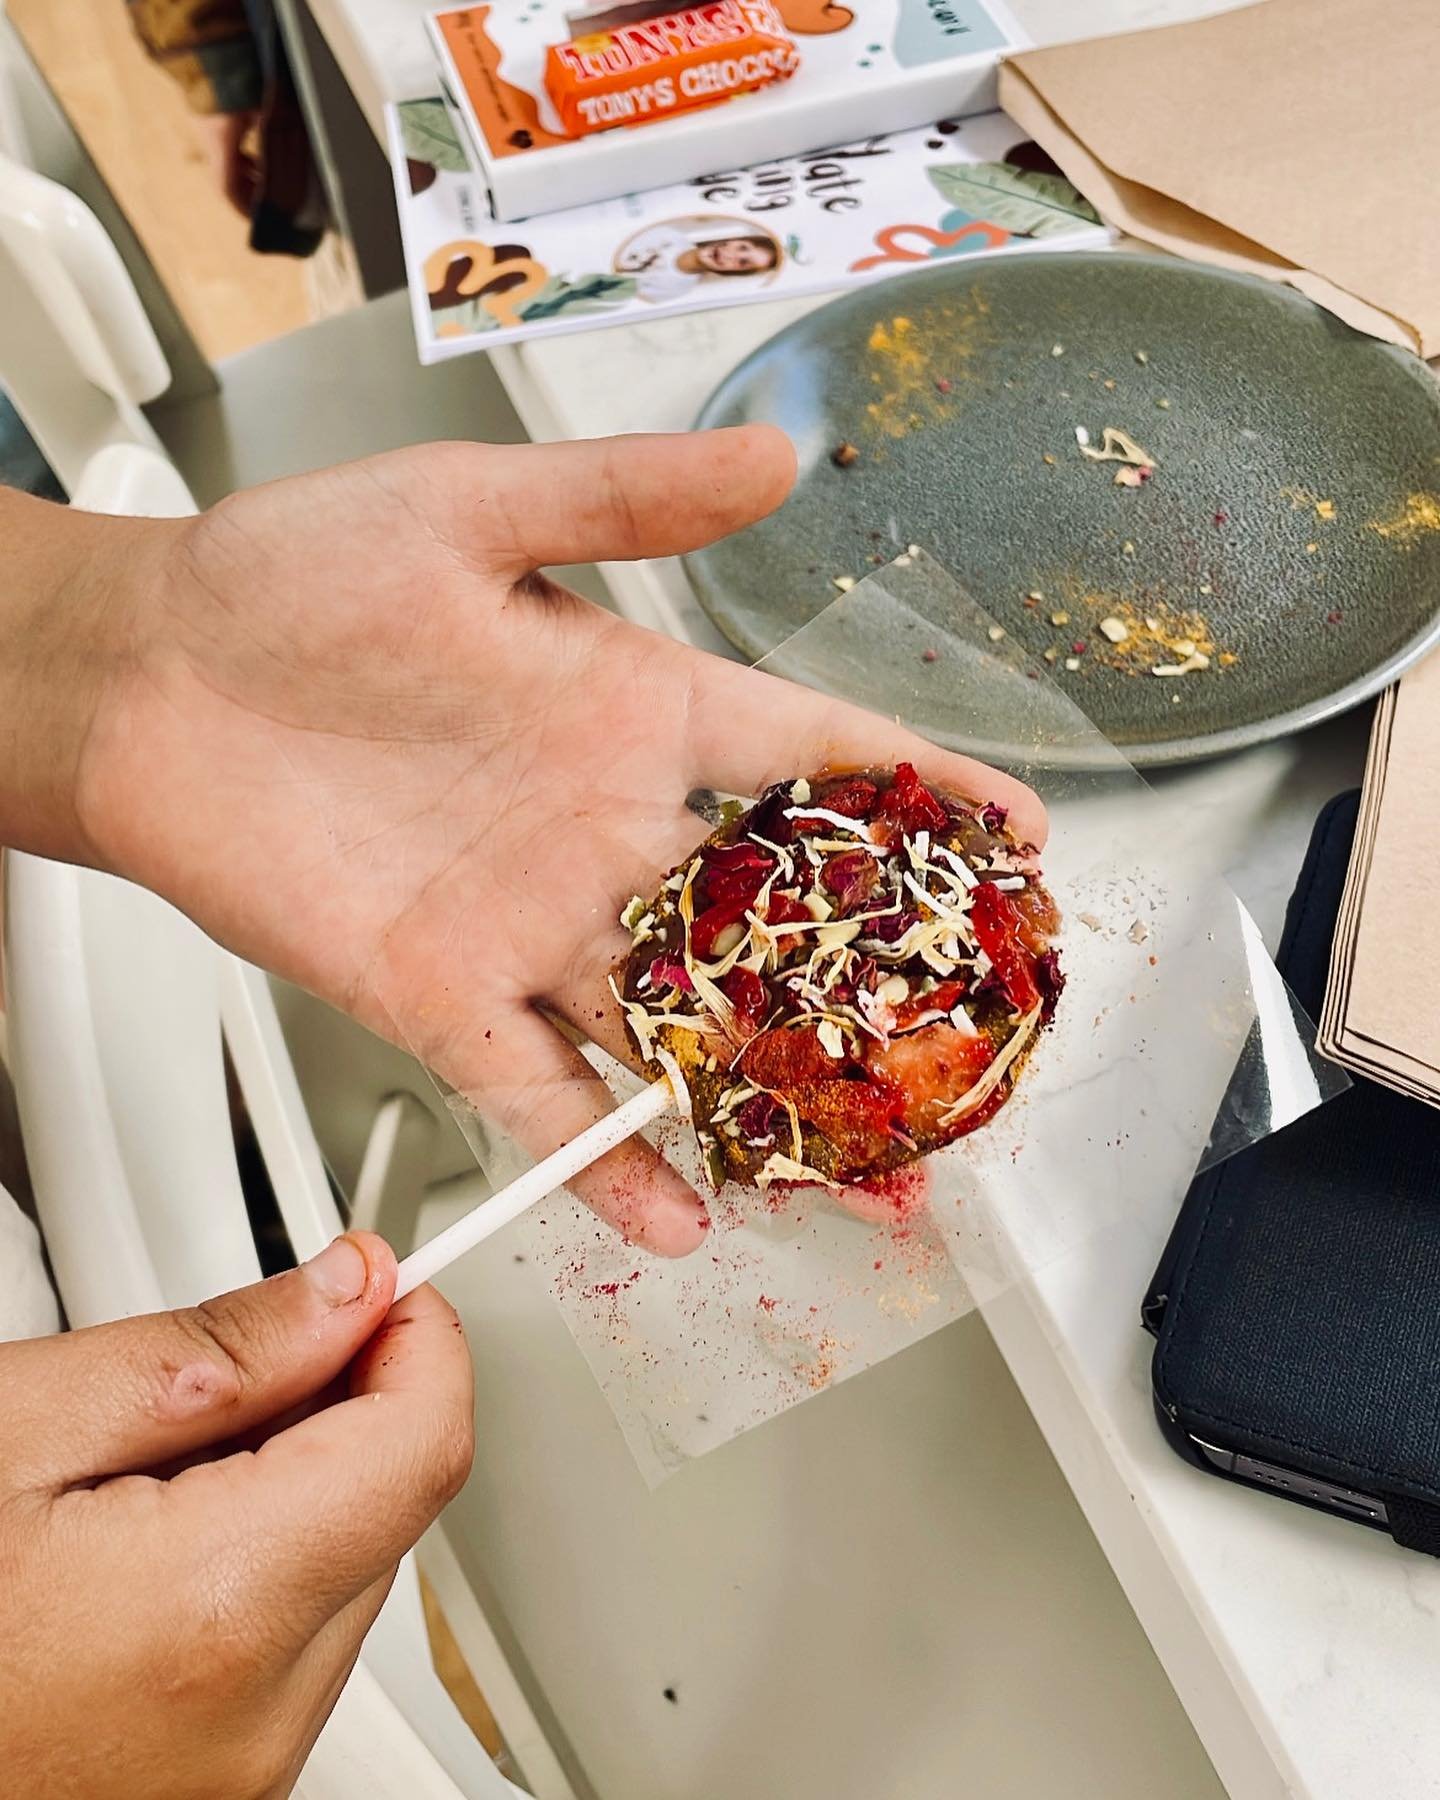 Arthur&rsquo;s chocolate lollipop looks so great! 🍫 He used a bunch of all-natural toppings from local suppliers on the Surf Coast and chocolate from @lukerchocolate in Colombia - &iexcl;Muy bien Arthur! 🥳 

#educationalchocolateworkshops #educatio